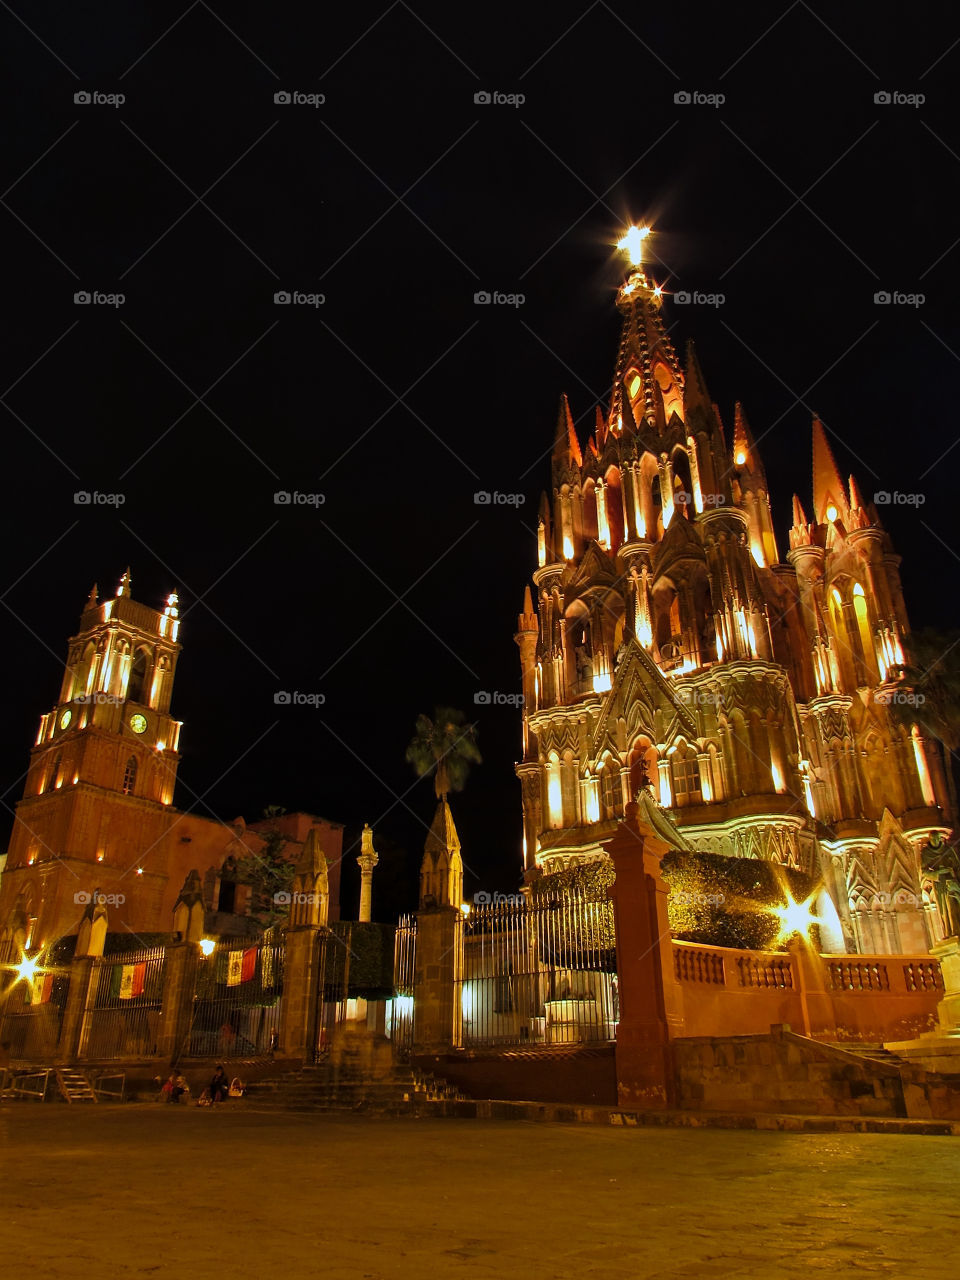 Night-time view of "Parroquia de San Miguel Arcangel" and the clock tower in the downtown area of San Miguel de Allende, Guanajuato, Mexico